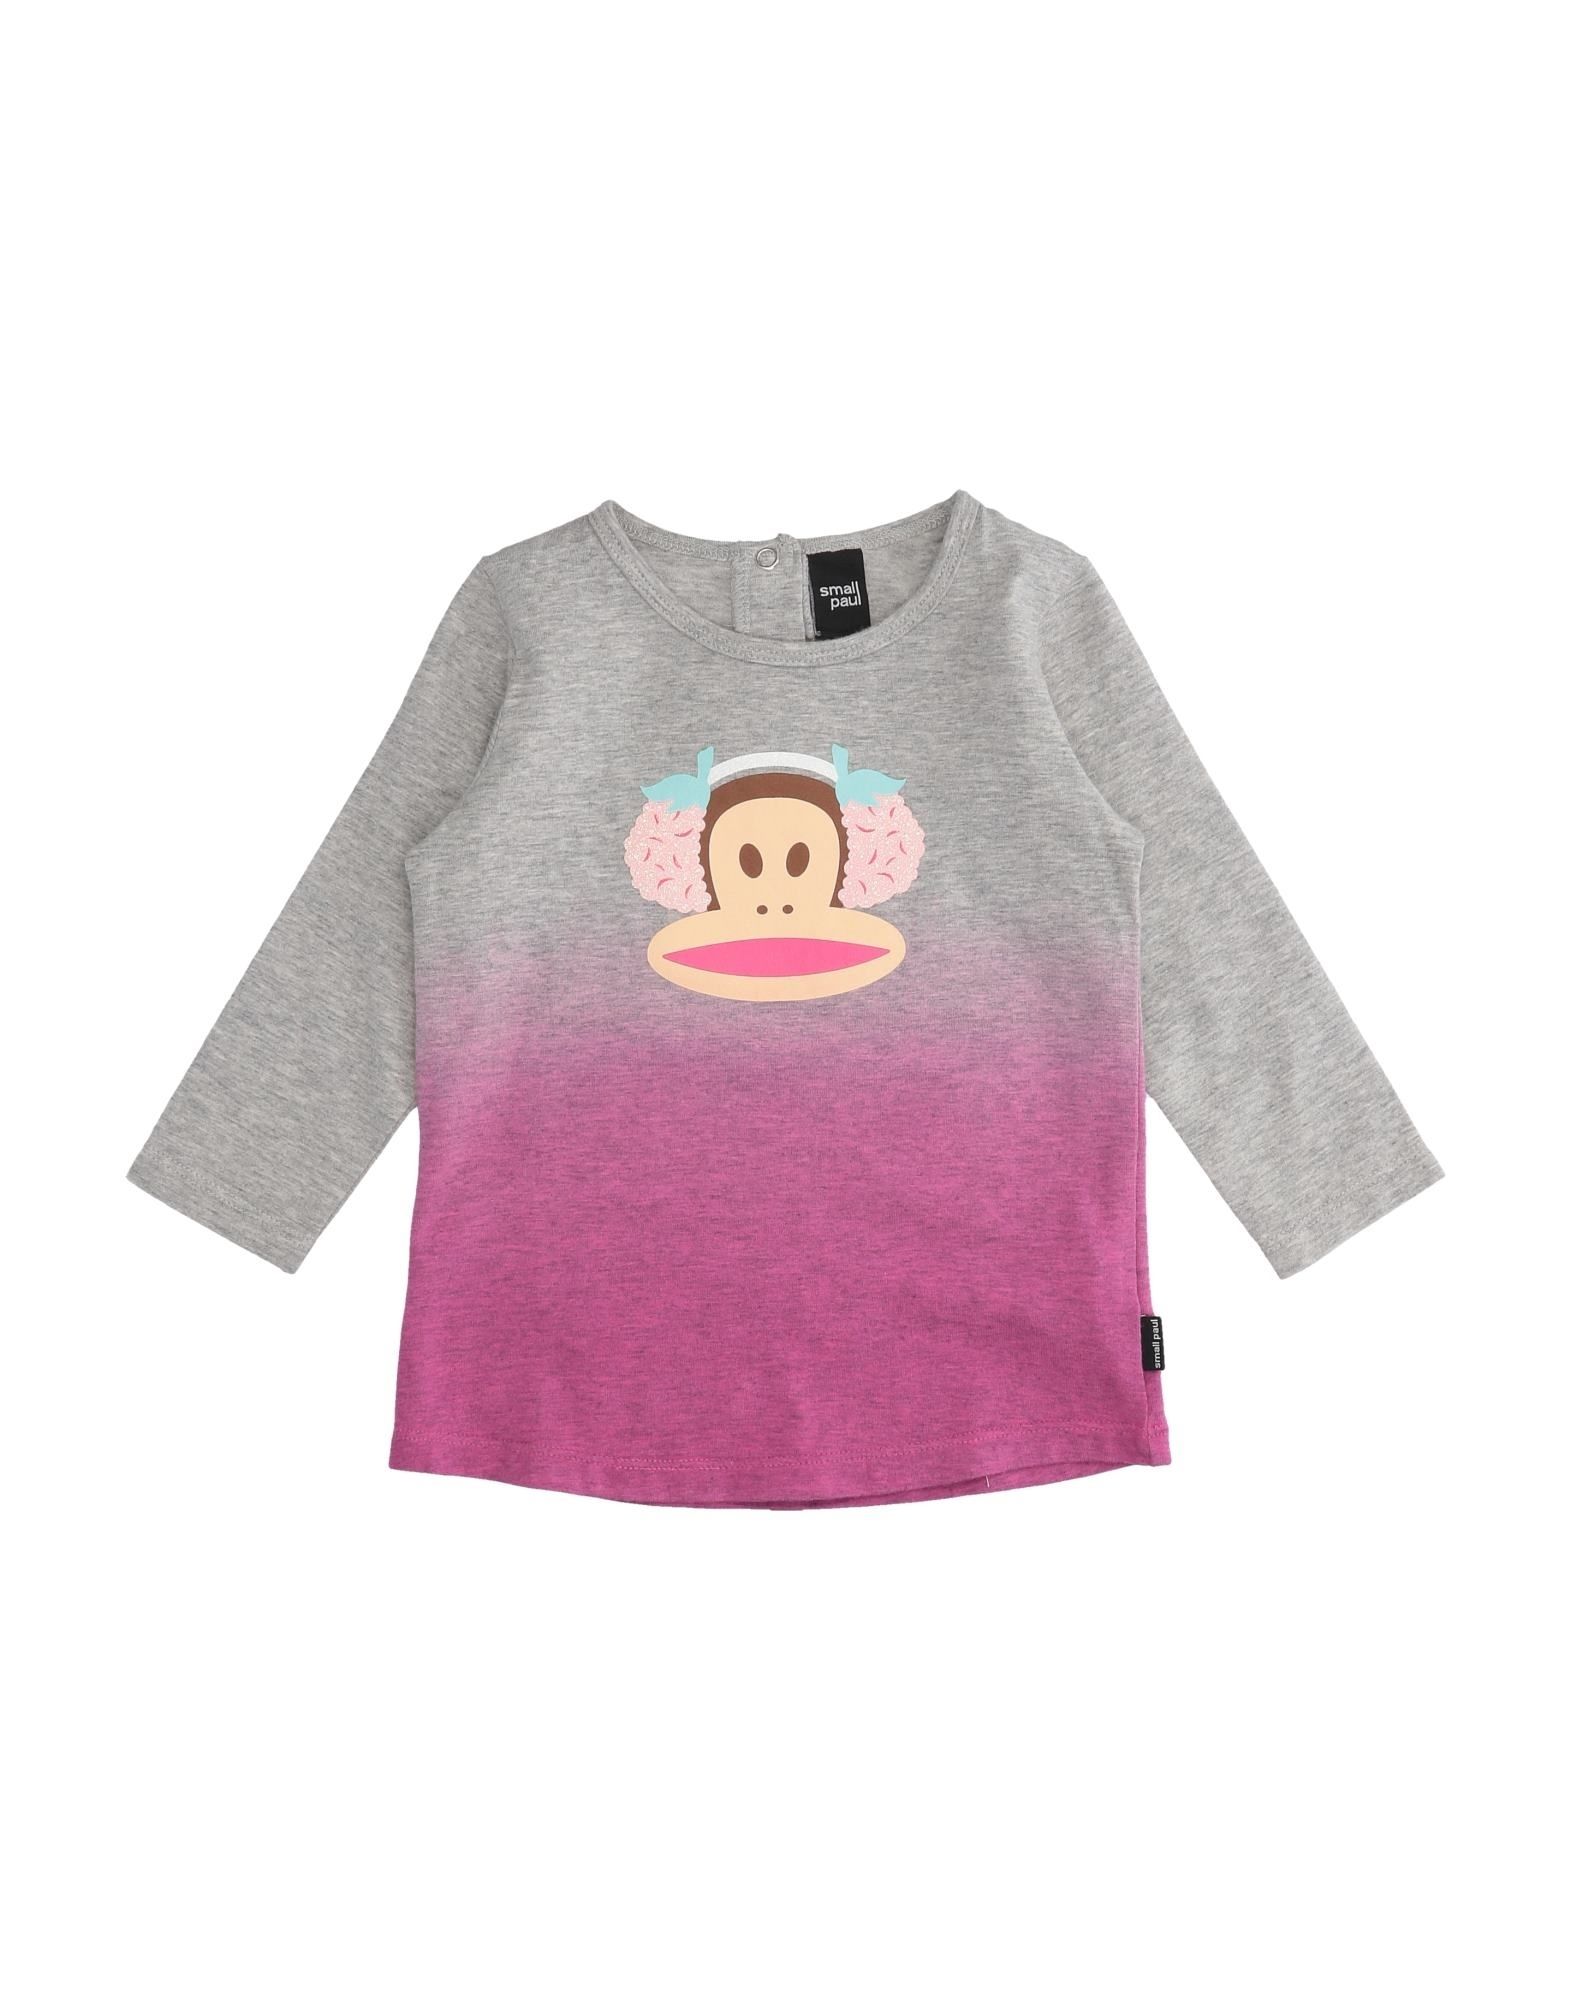 Small Paul By Paul Frank Kids' T-shirts In Grey